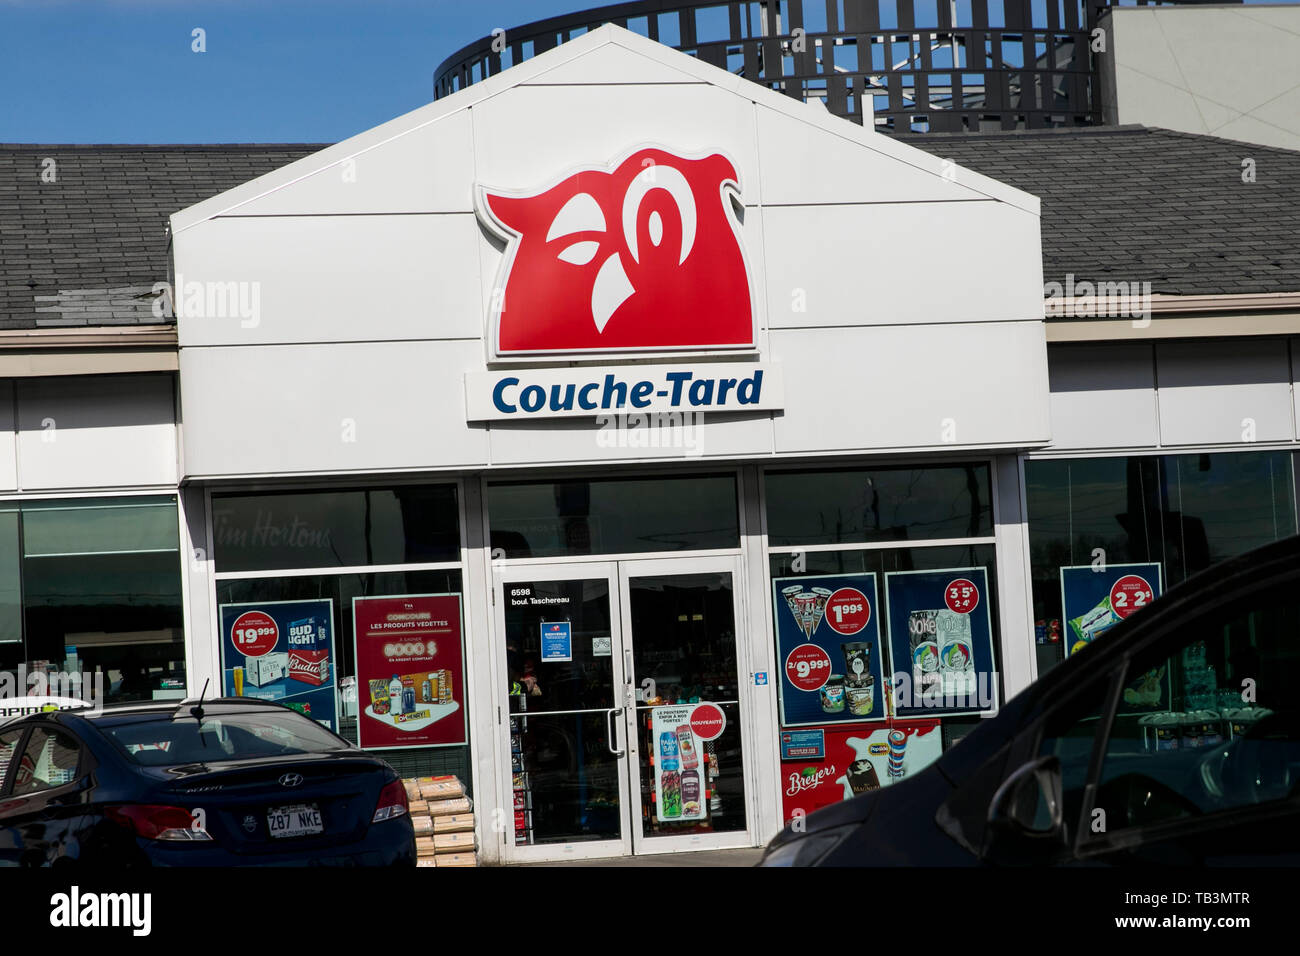 A logo sign outside of a Couche-Tard convenience store location in Brossard, Quebec, Canada, on April 23, 2019. Stock Photo